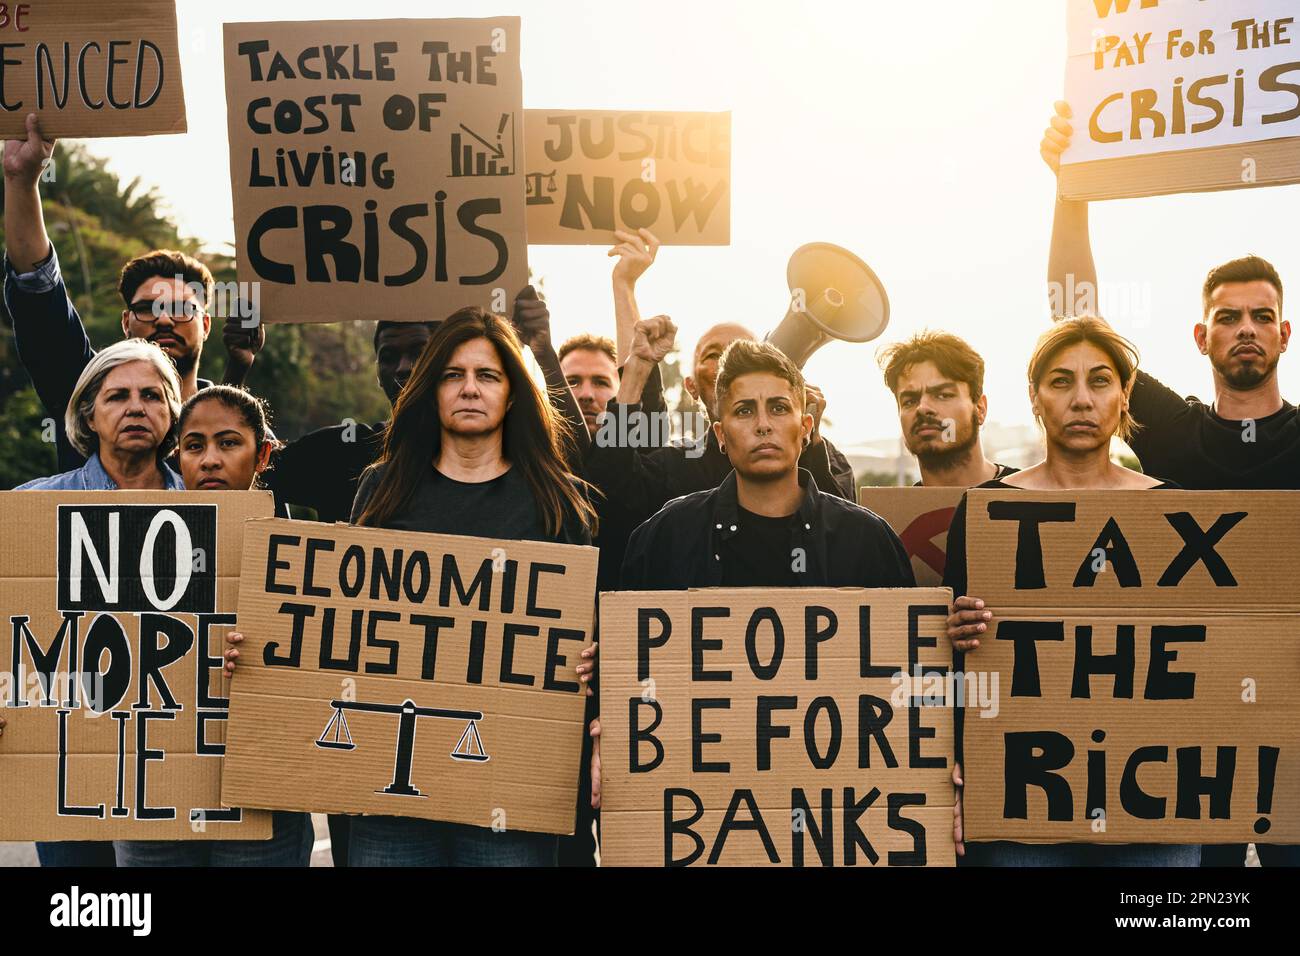 Demonstration of multiracial activists protesting against financial crisis and global inflation - Economic justice activism concept Stock Photo